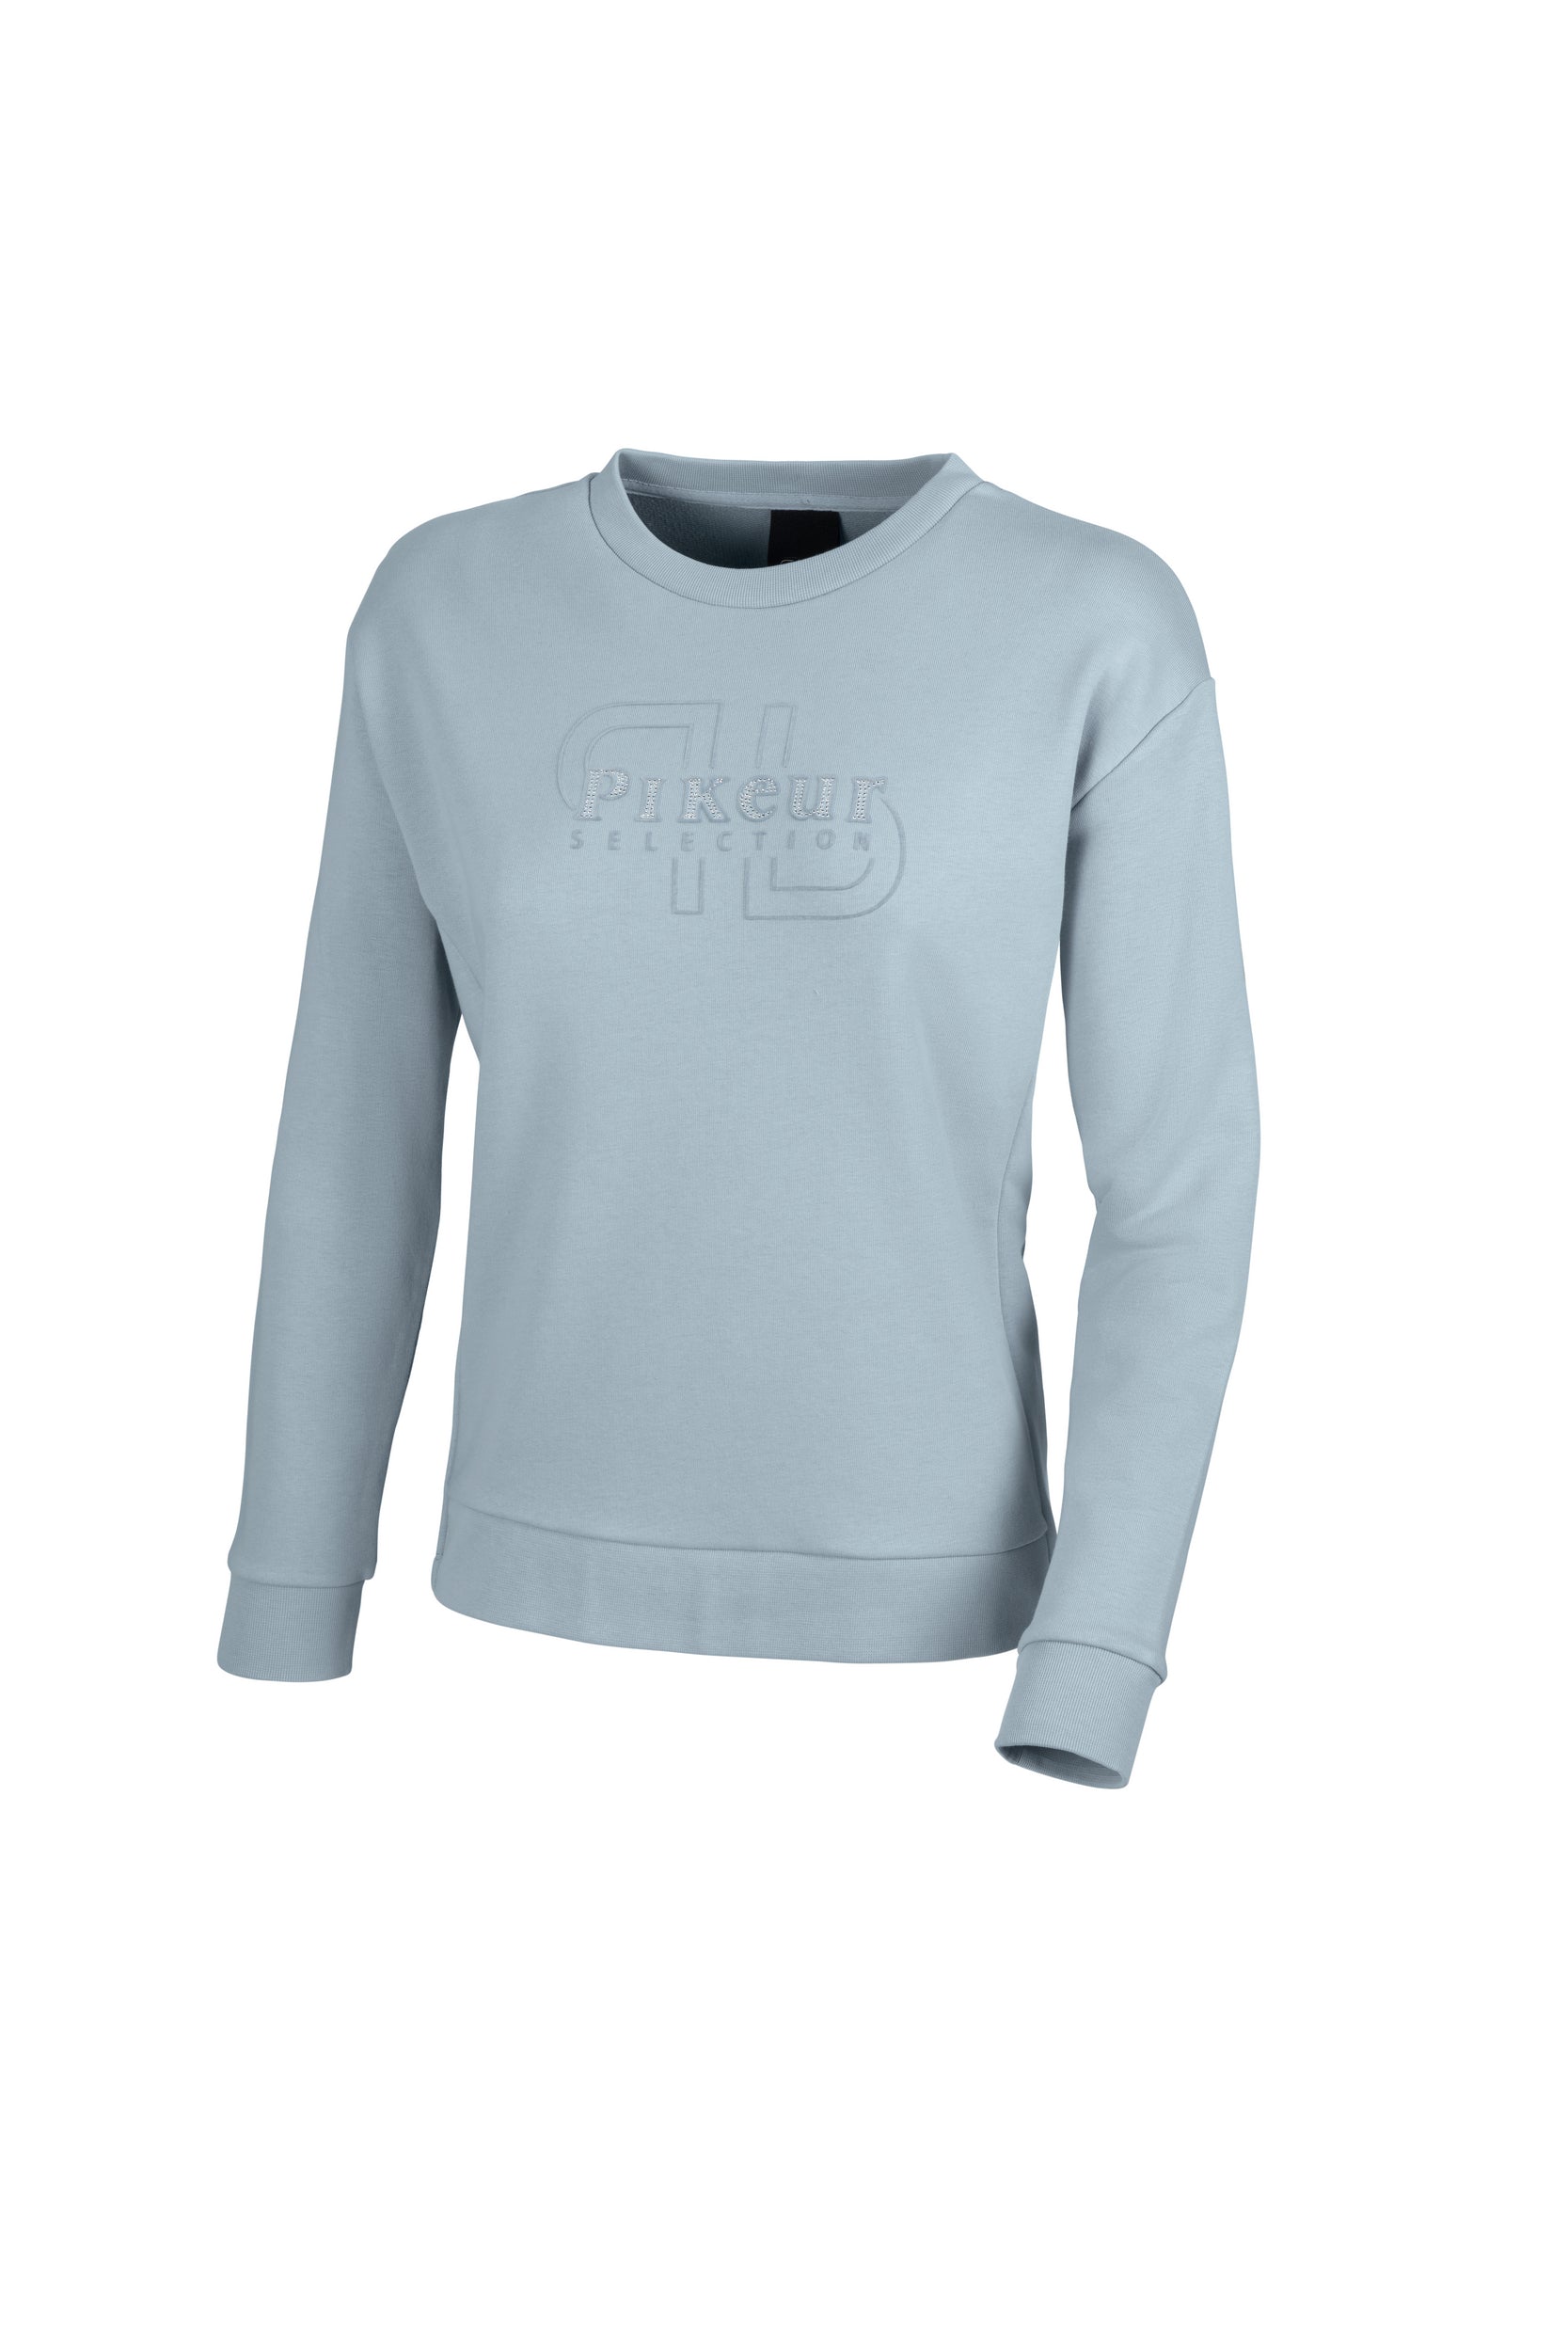 Pikeur selection sweater in Pastel blue